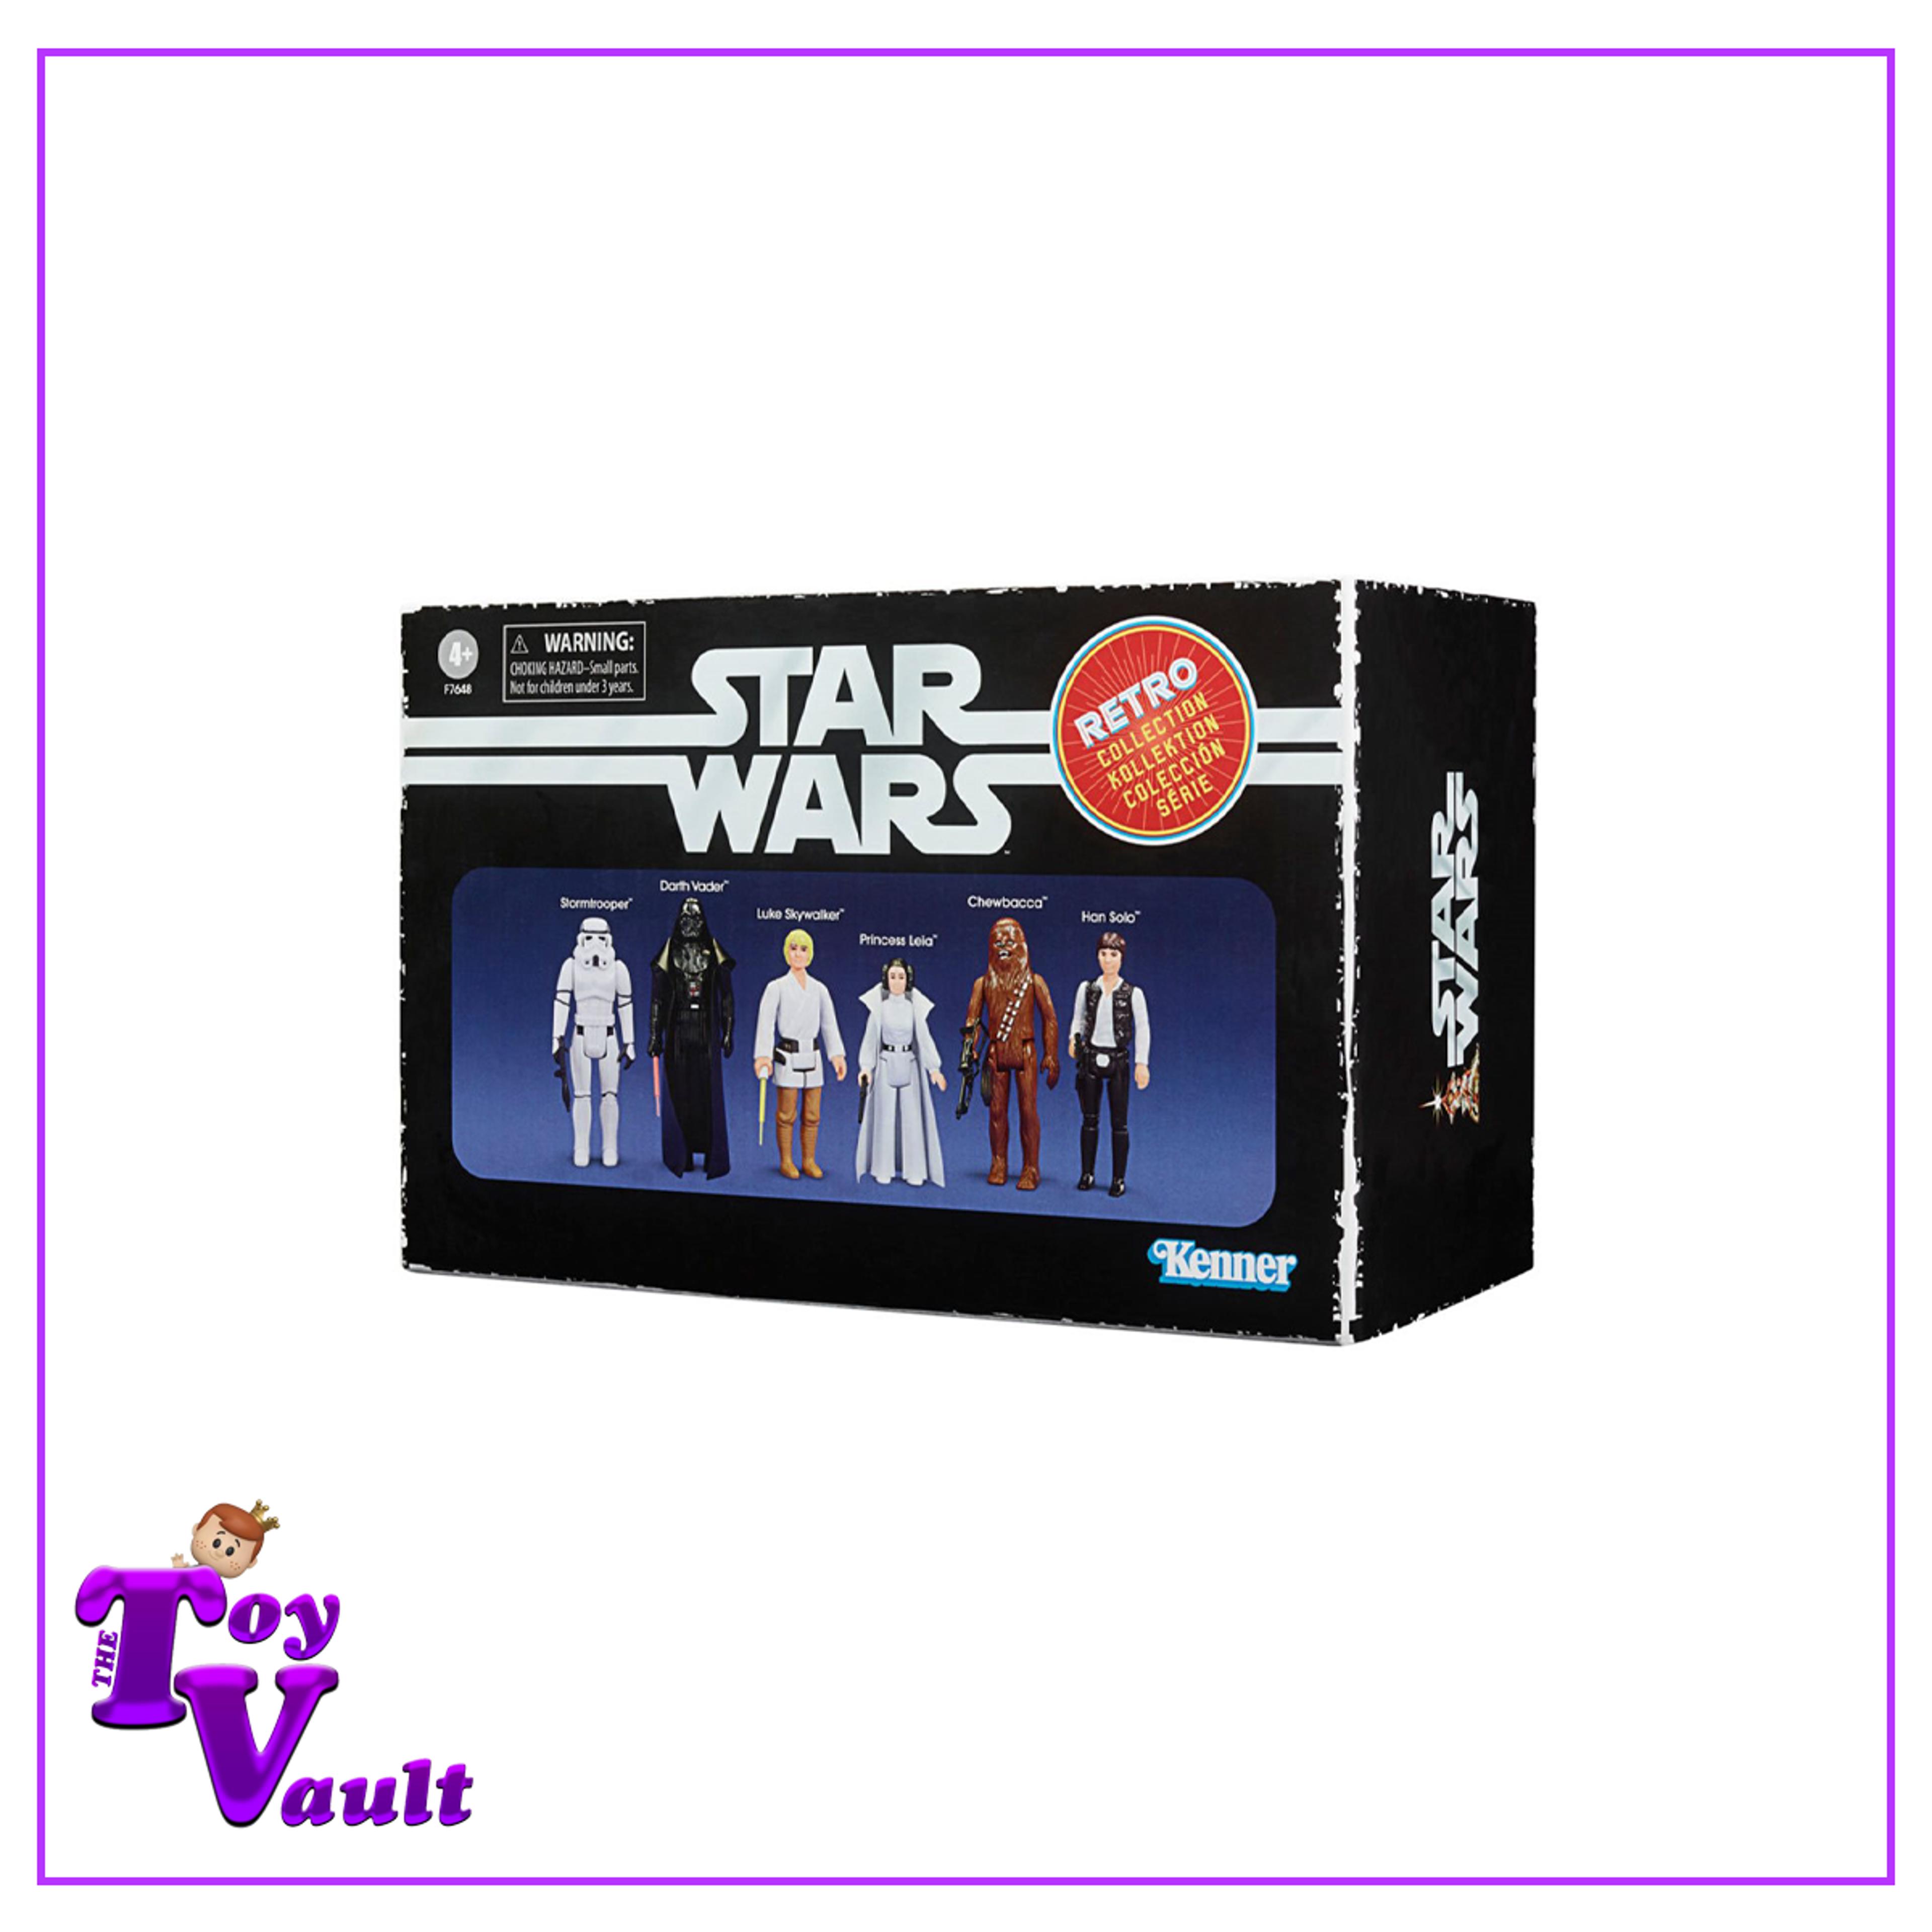 Hasbro Star Wars The Retro Collection Kenner Action Figures Set 